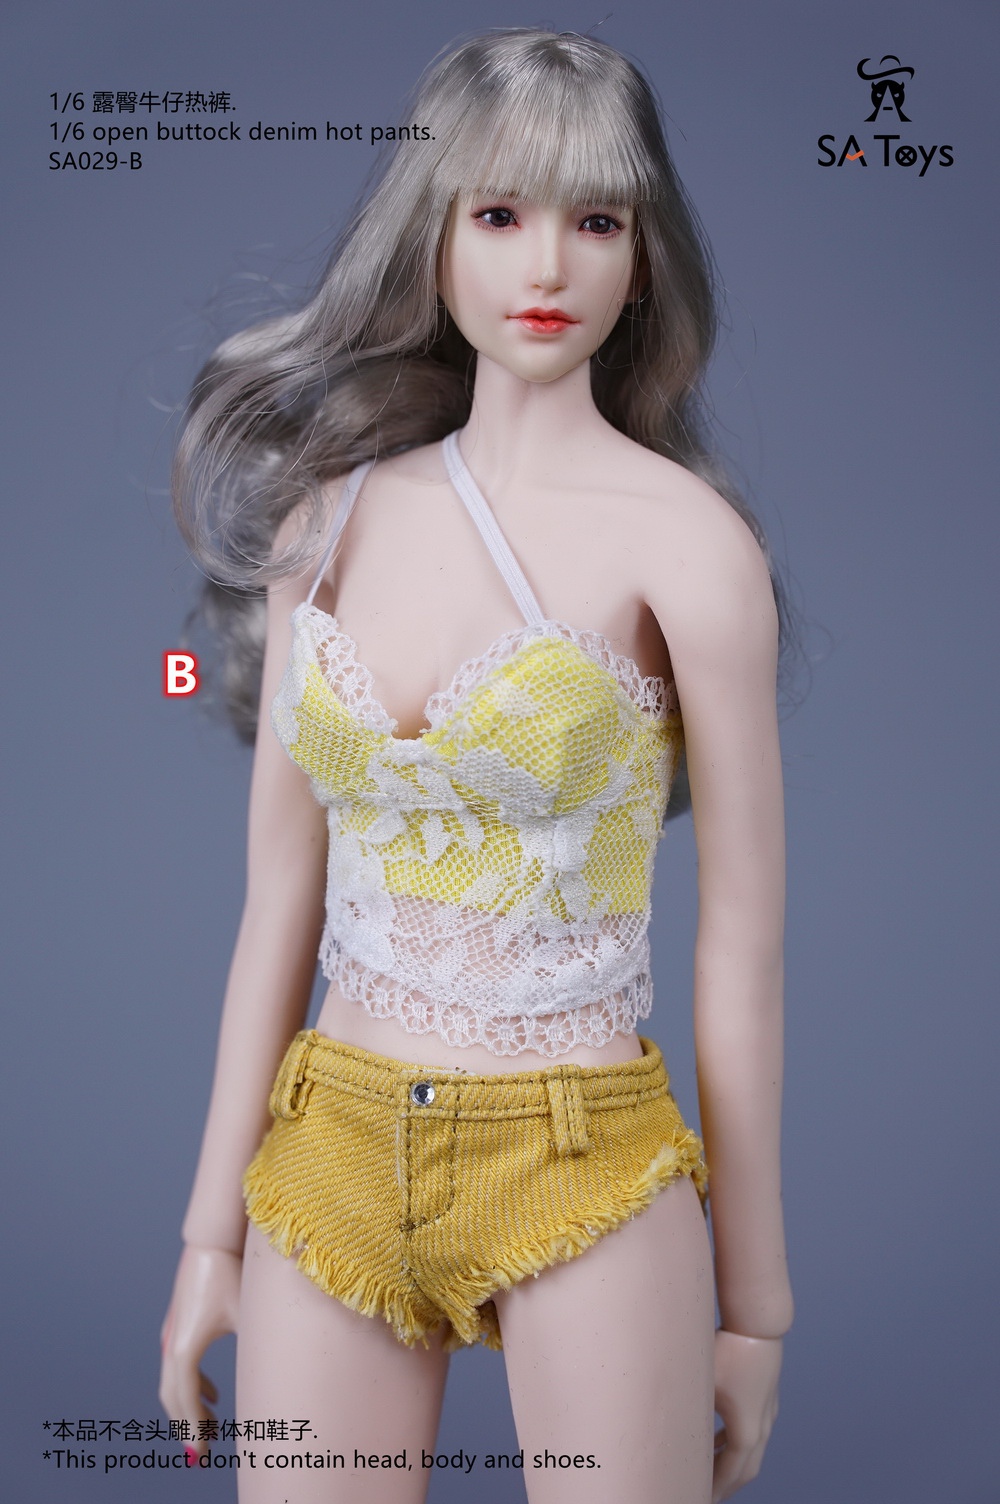 Female - NEW PRODUCT: SA Toys: 1/6 Women's - Printed T-shirt, trousers with exposed hips & denim hotpants (multiple options) 10535611